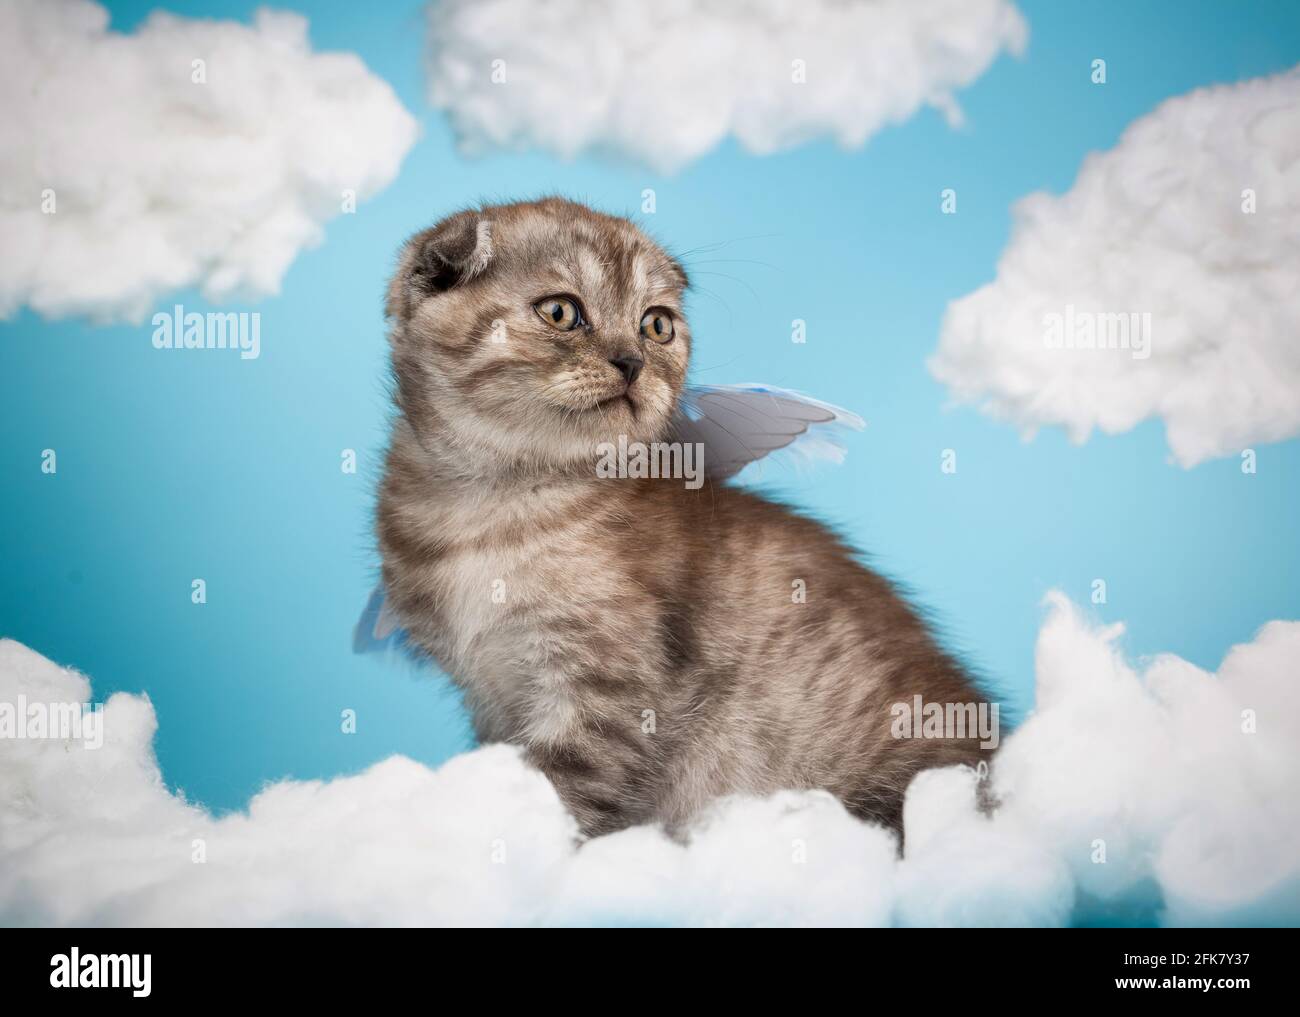 Cute charming angel shaped scottish kitten with purple little wings sits on a blue sky background among white clouds. Portrait of lovely dark gray str Stock Photo